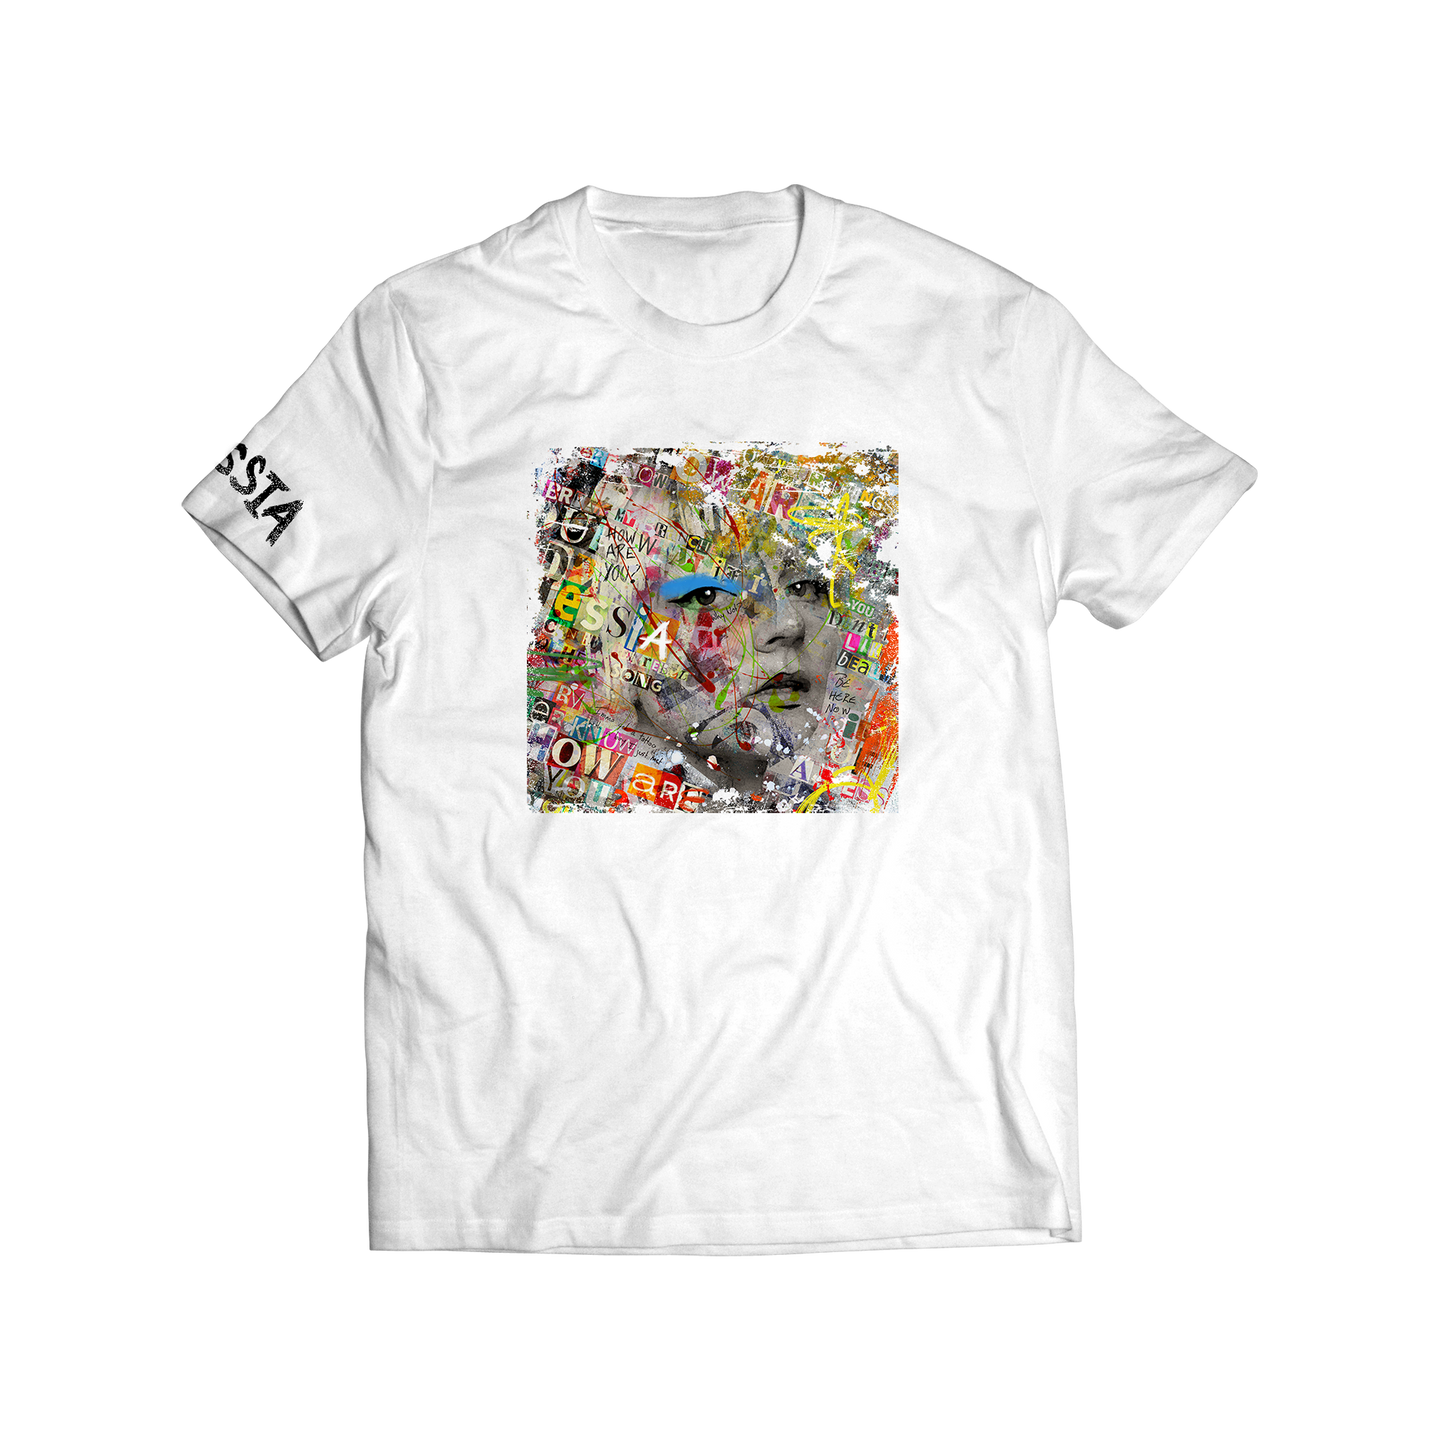 How Are You? EP Art T-Shirt - White